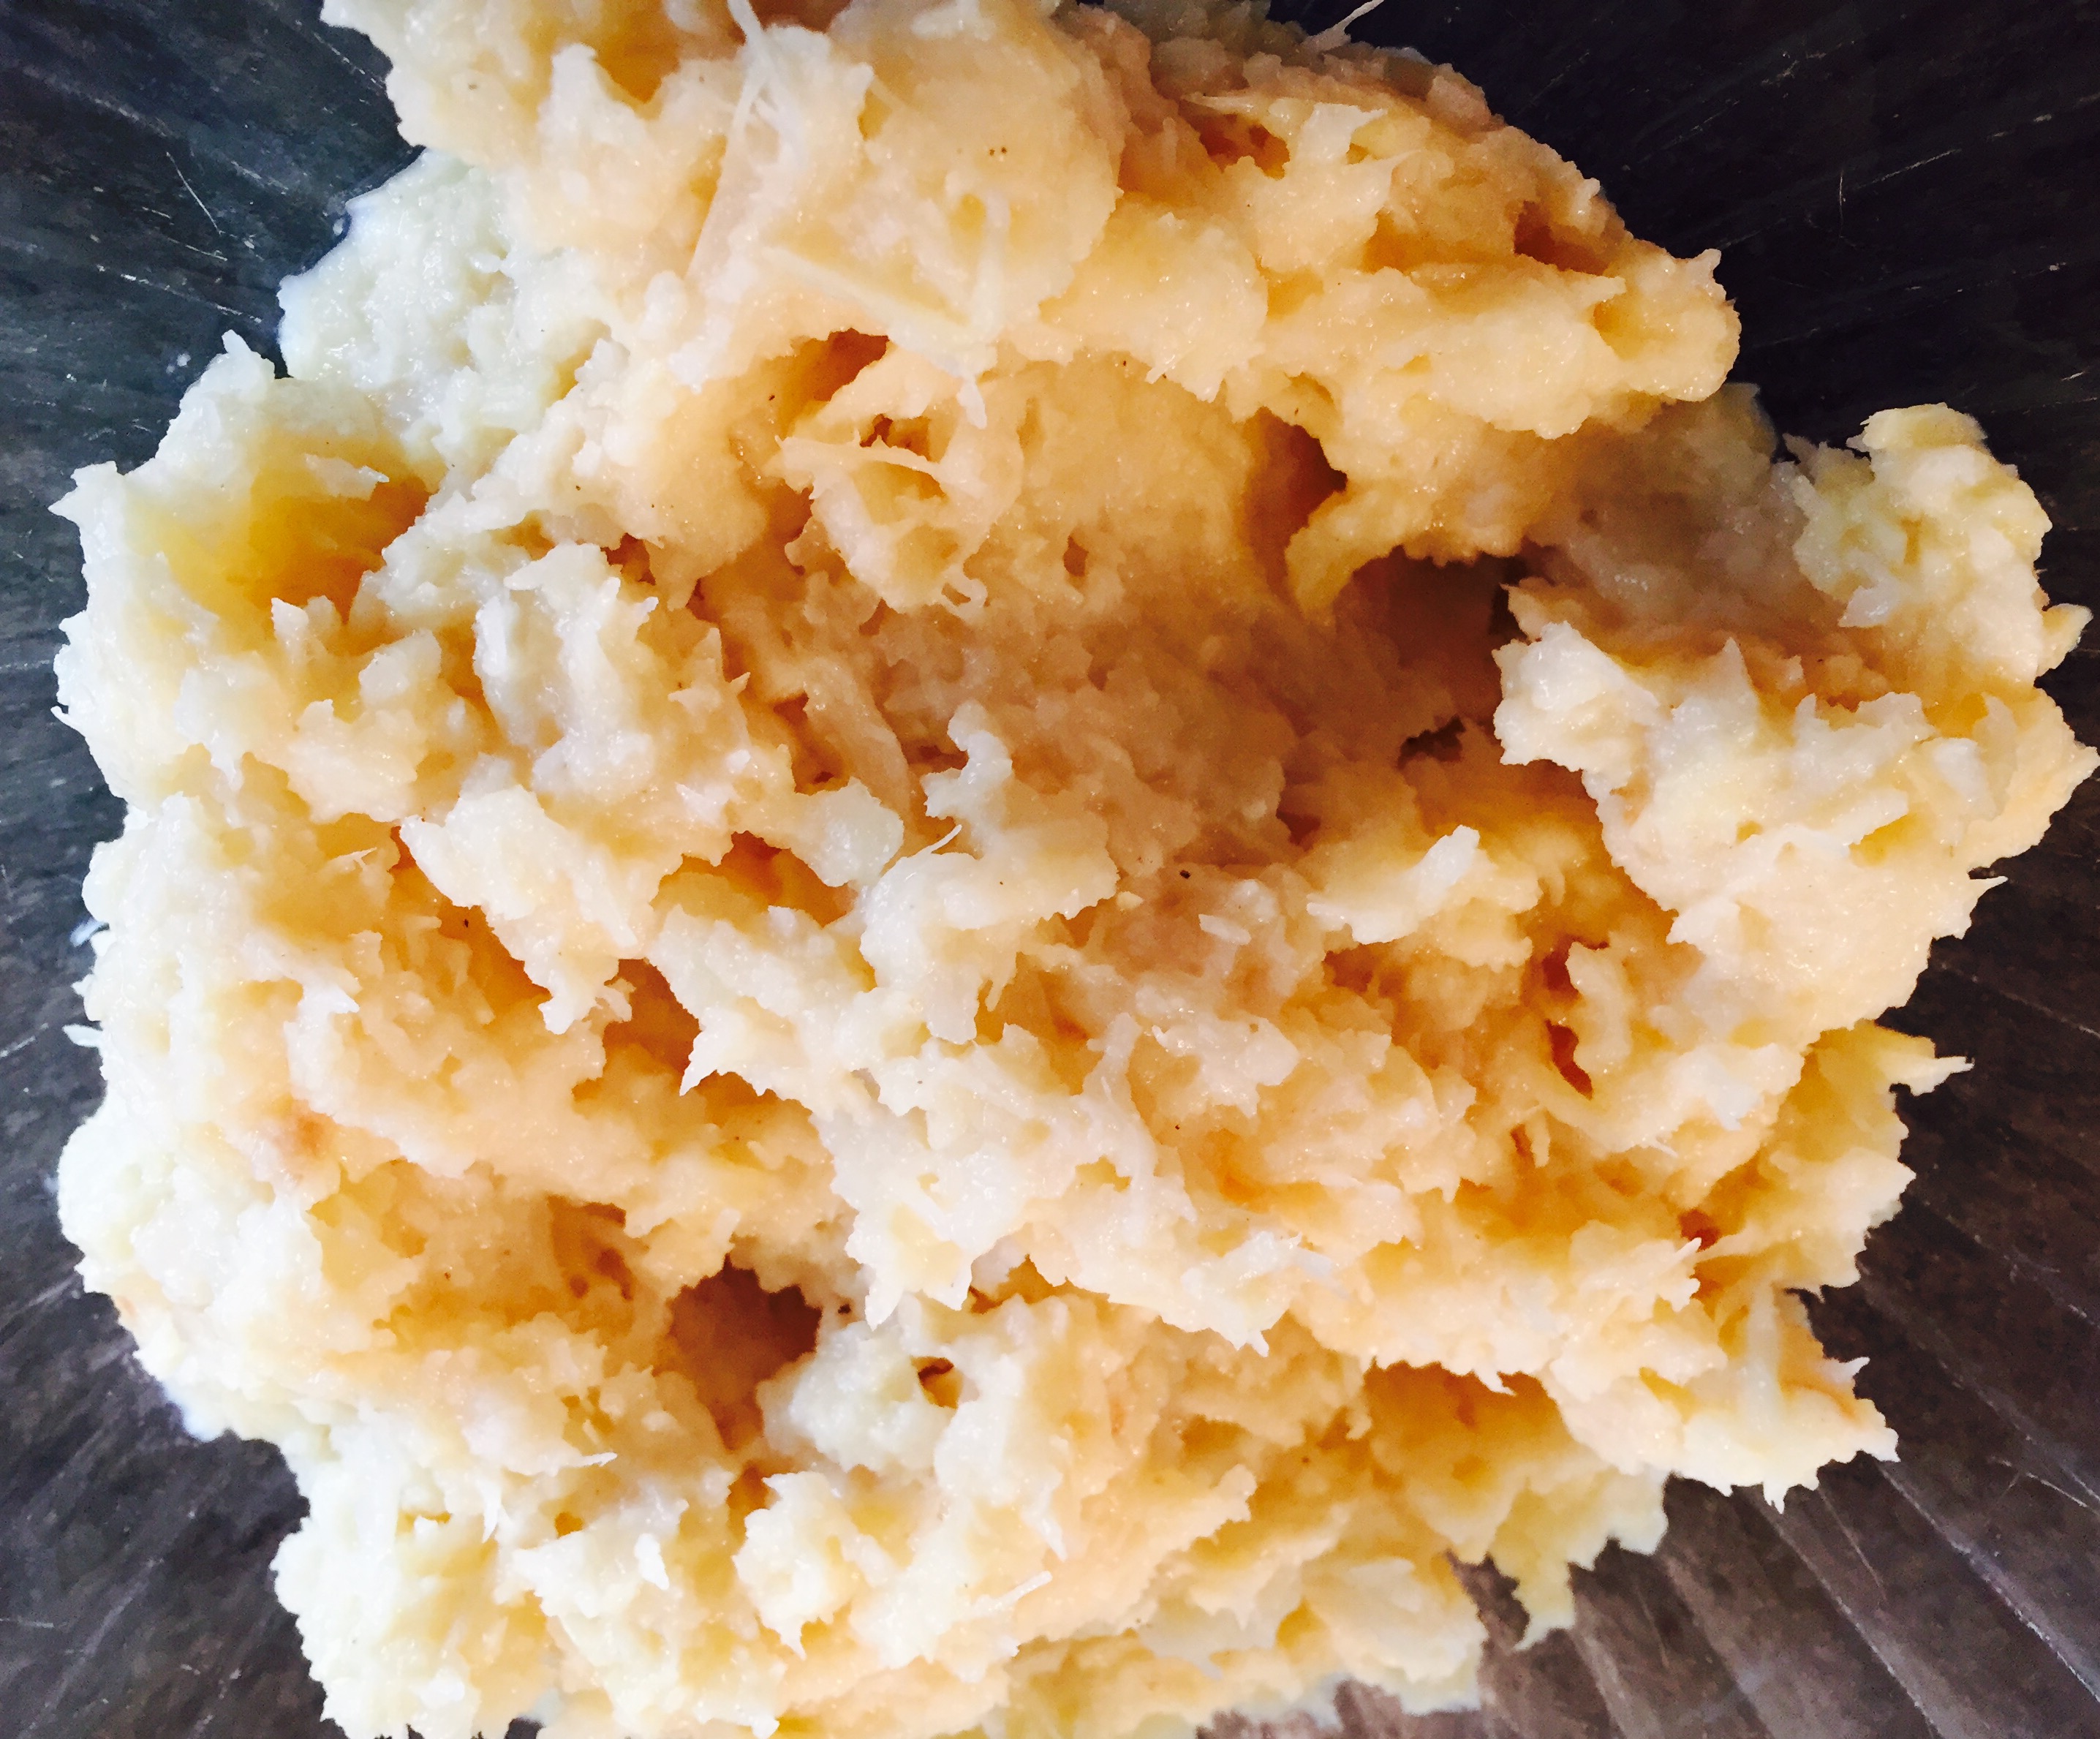 Delicious steamy buttered mashed parsnips